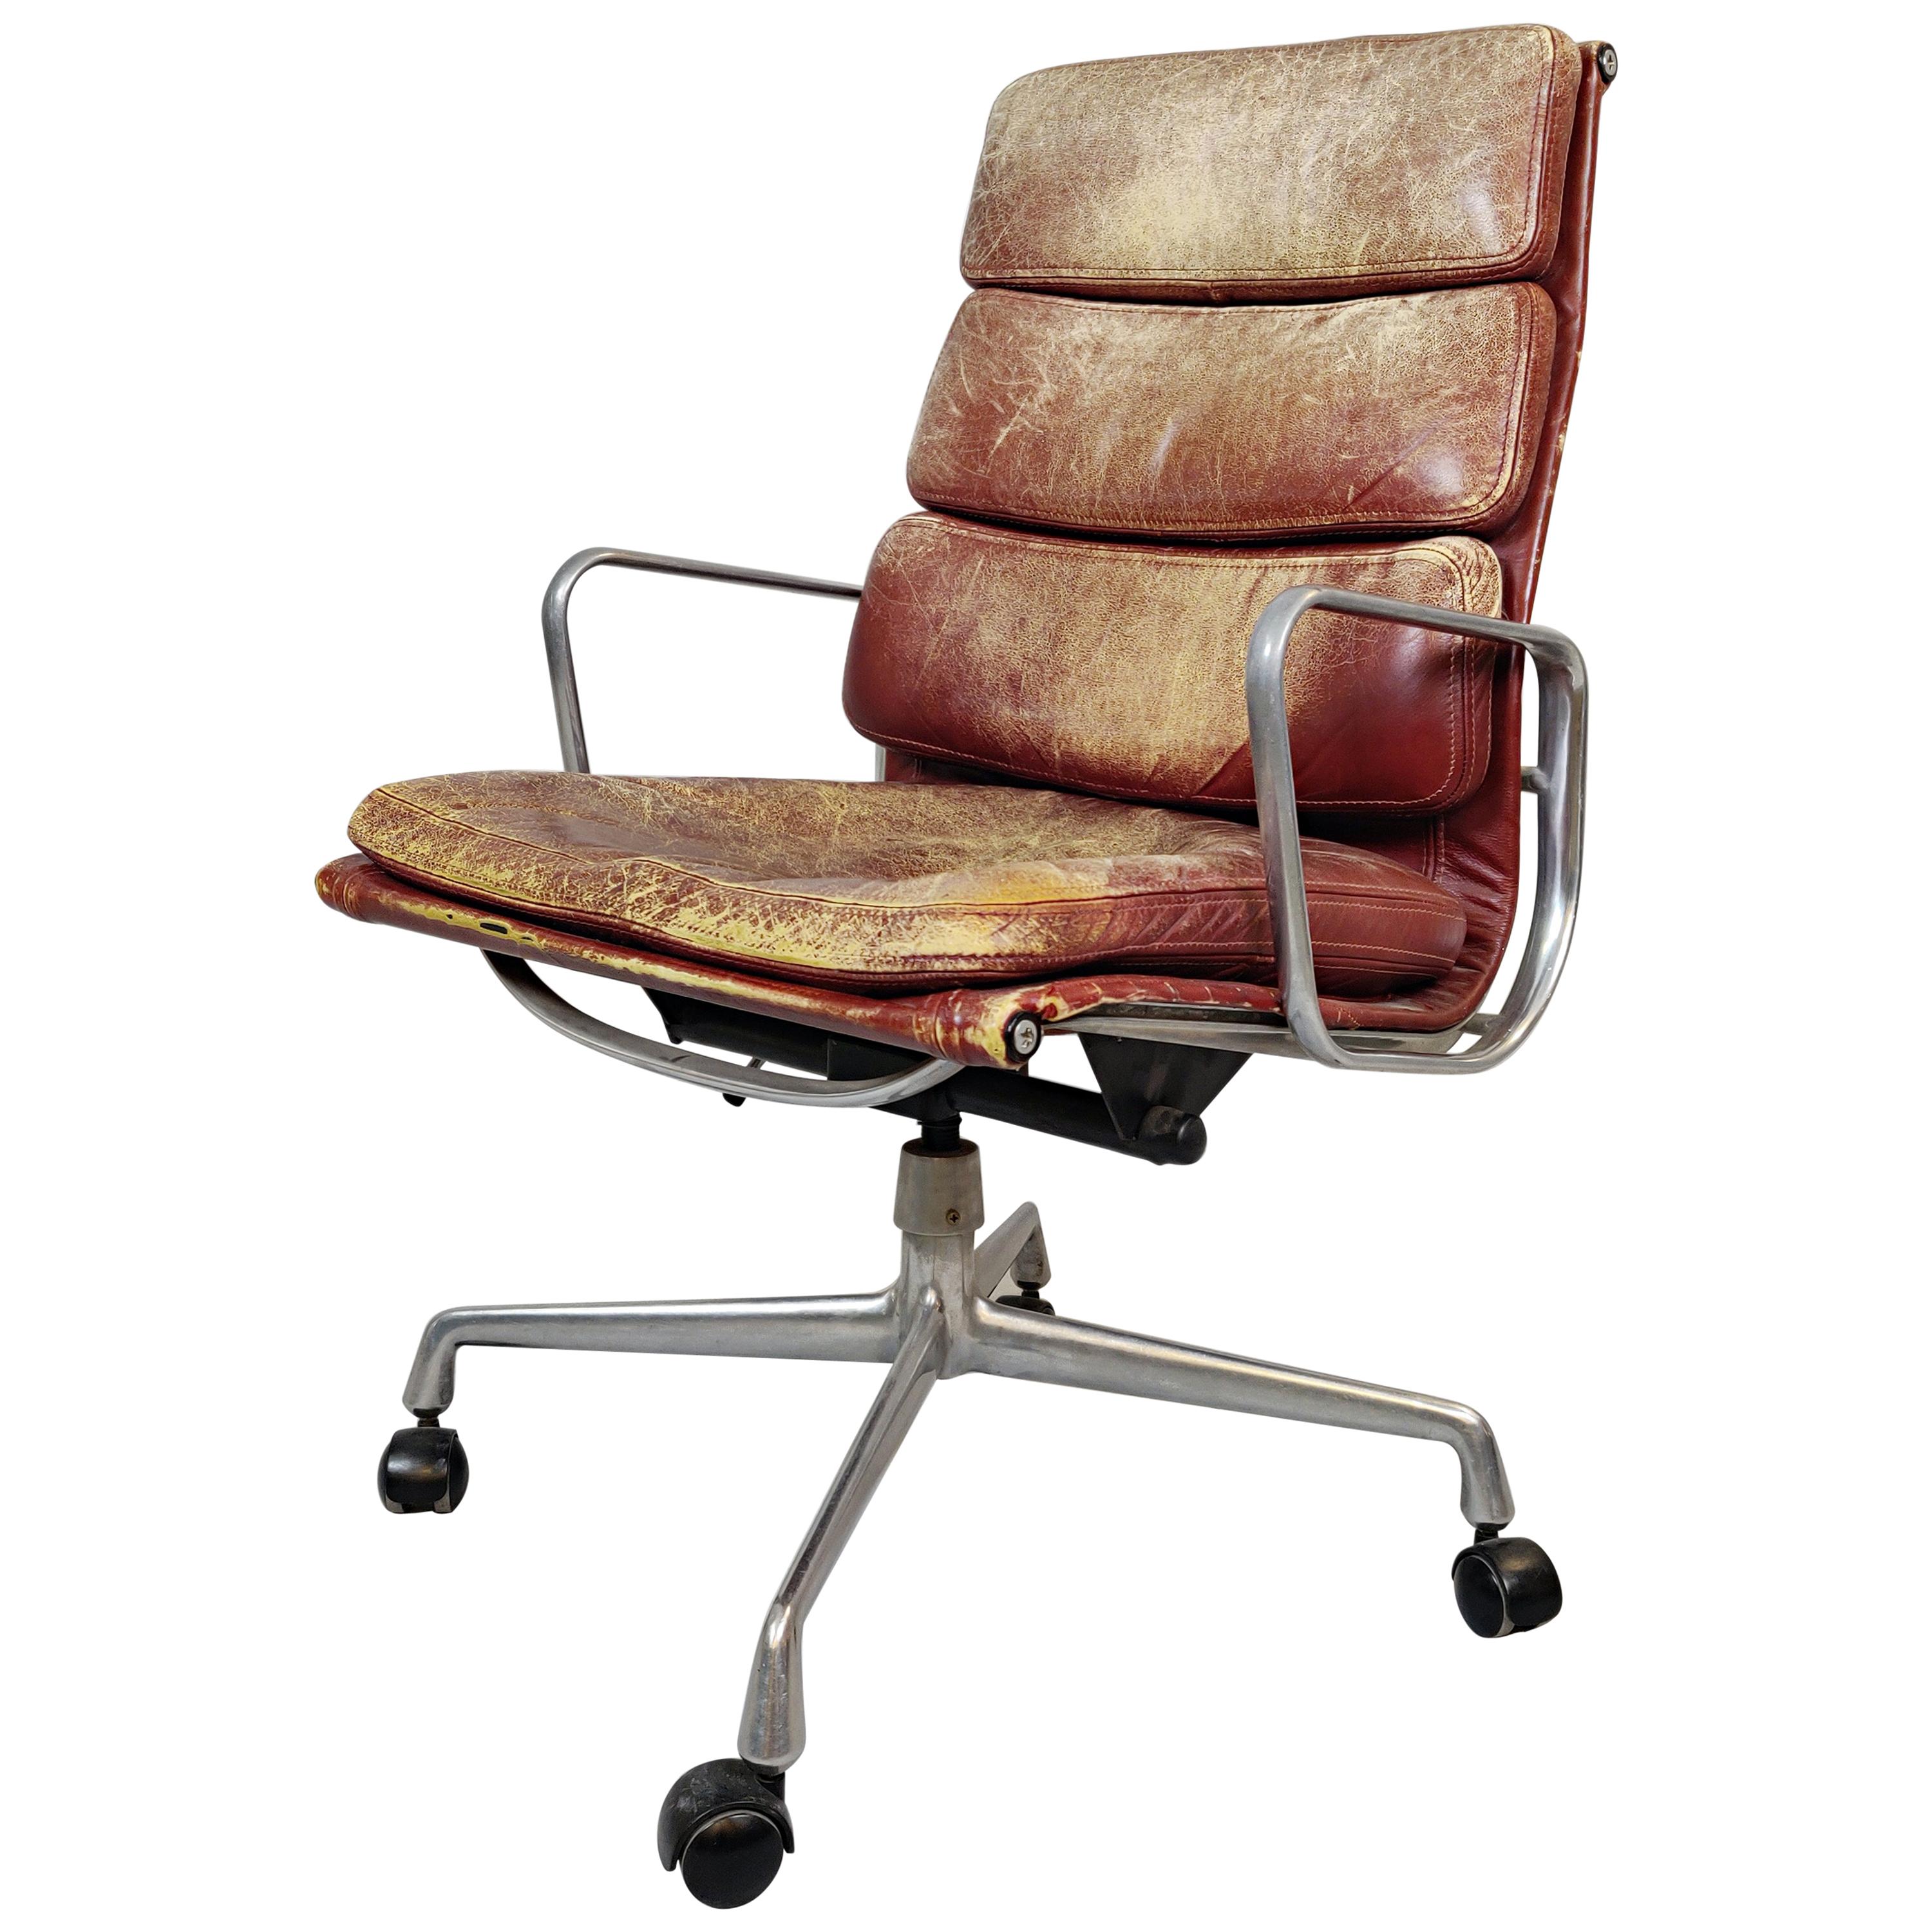 Executive Desk Chair by Charles Eames for Herman Miller